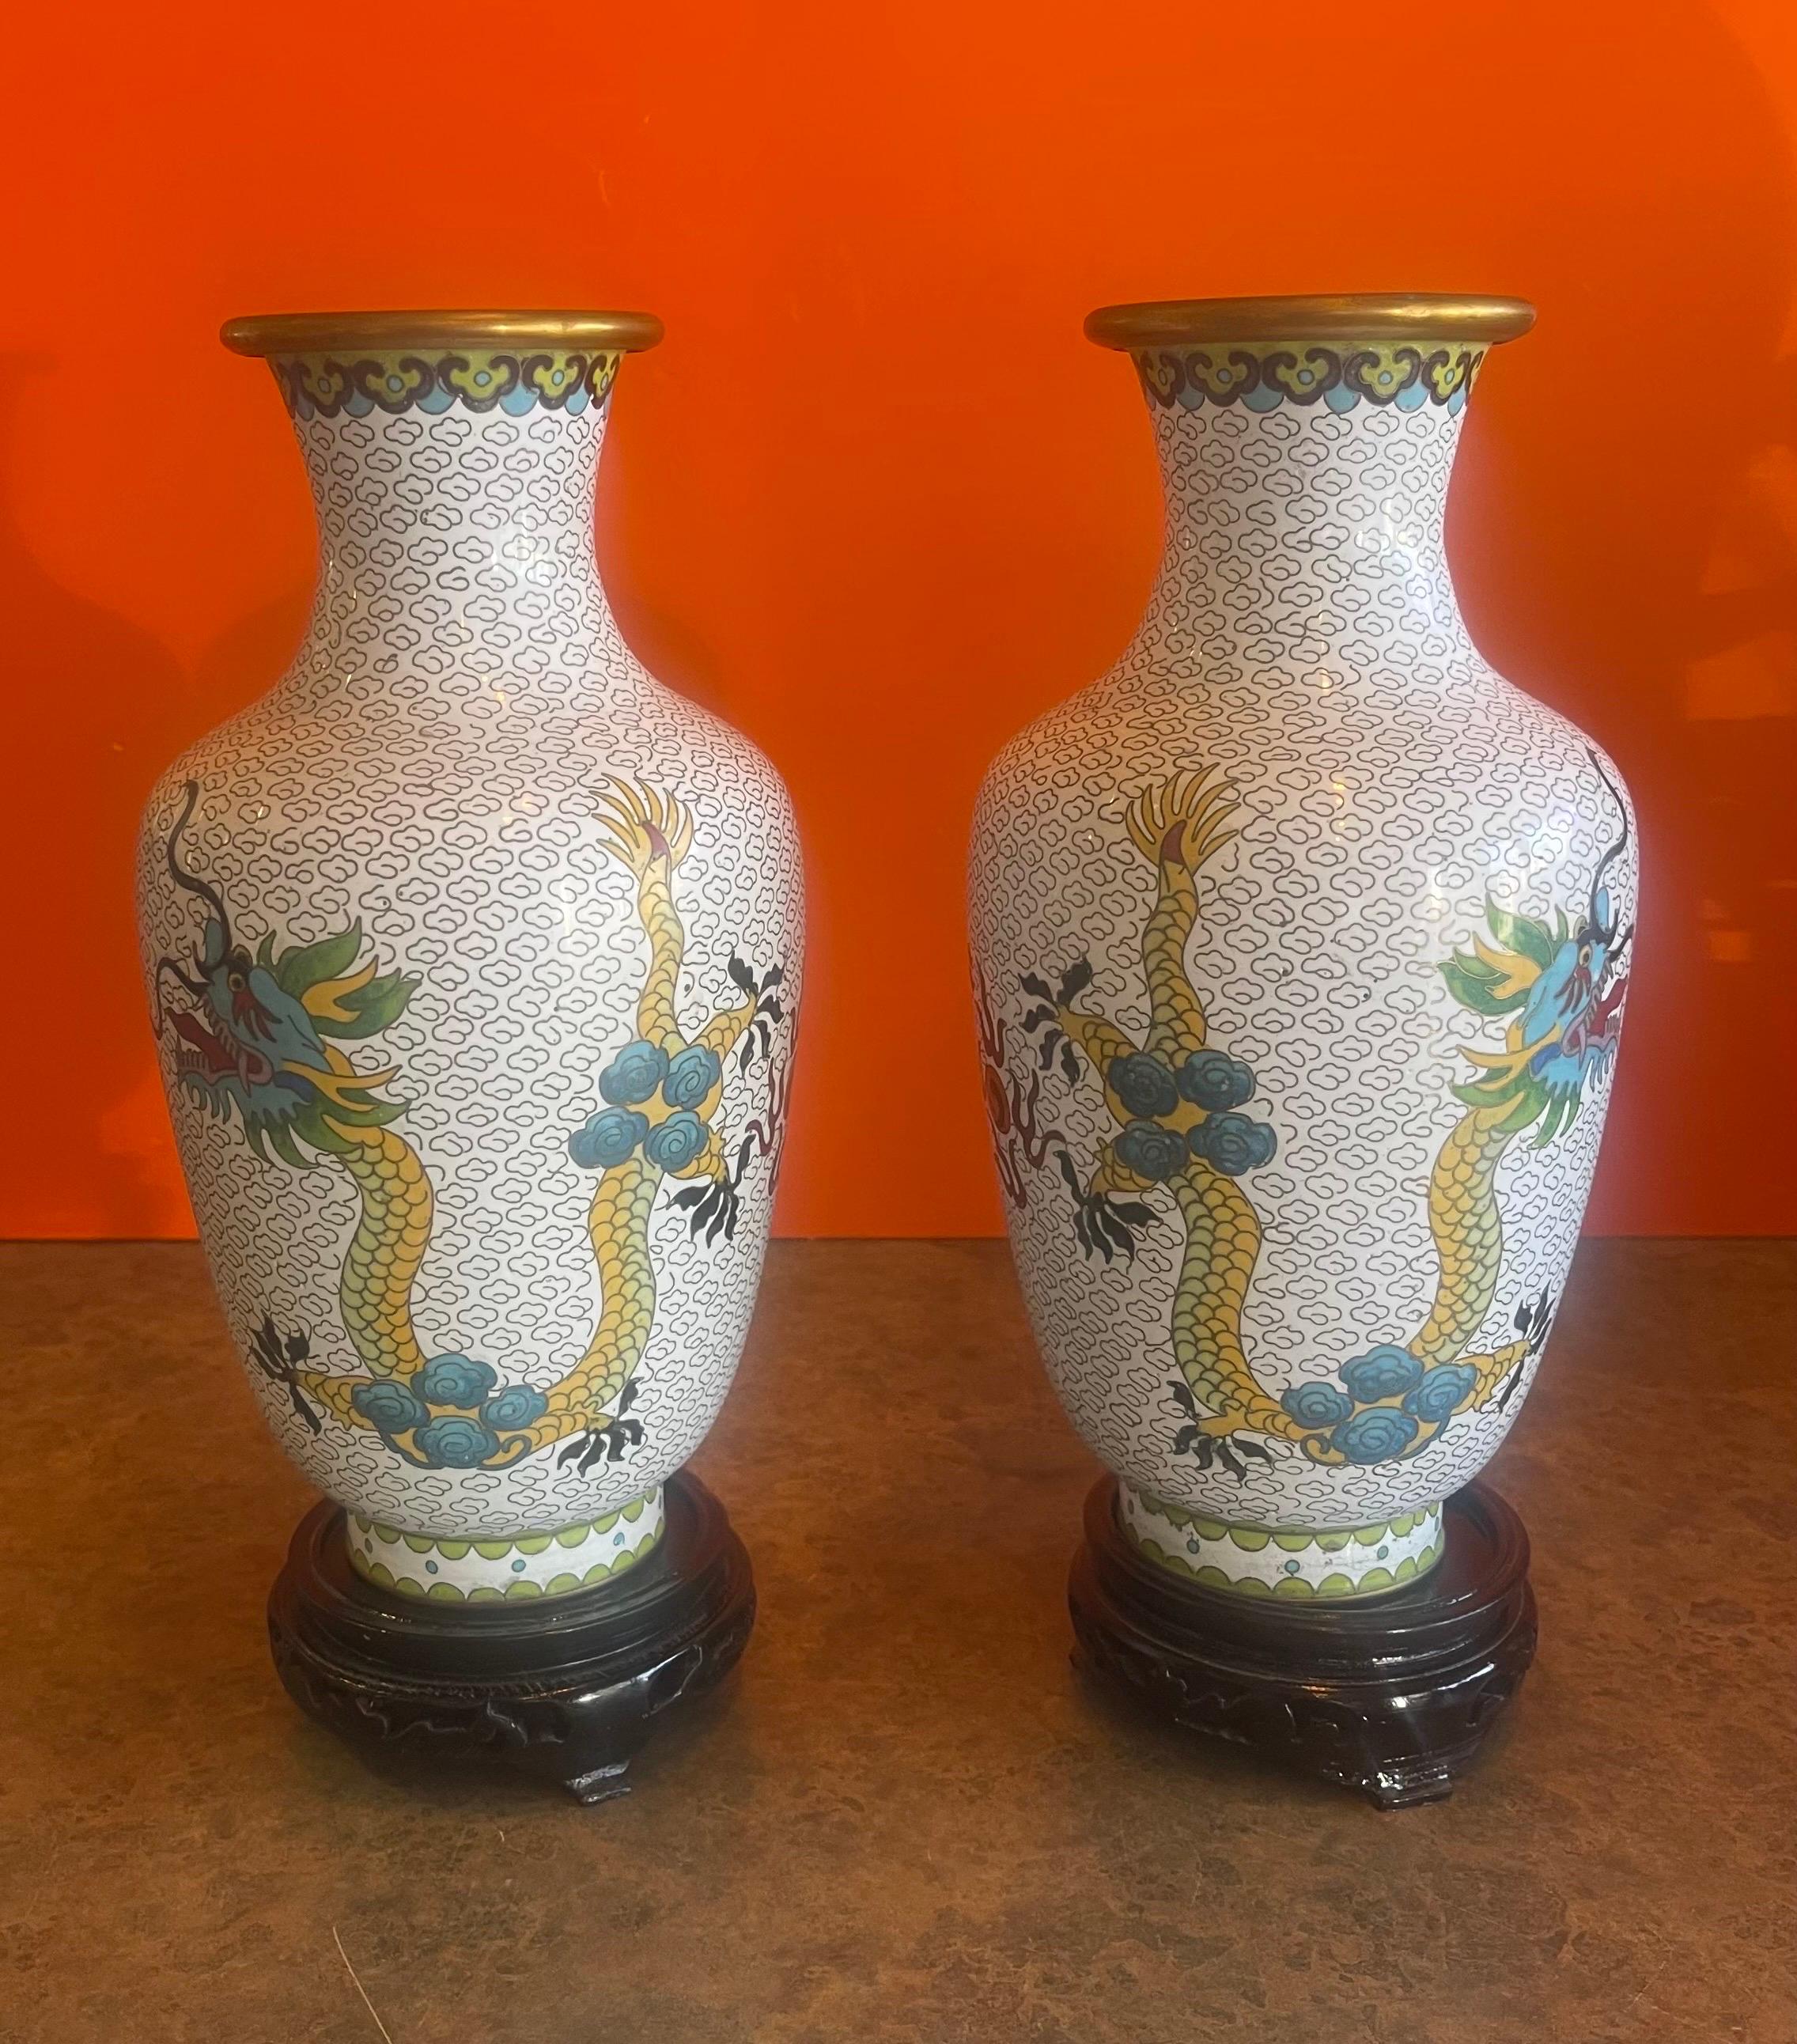 Mirrored Pair of Chinese Cloisonne Vases with Dragon Motif For Sale 6